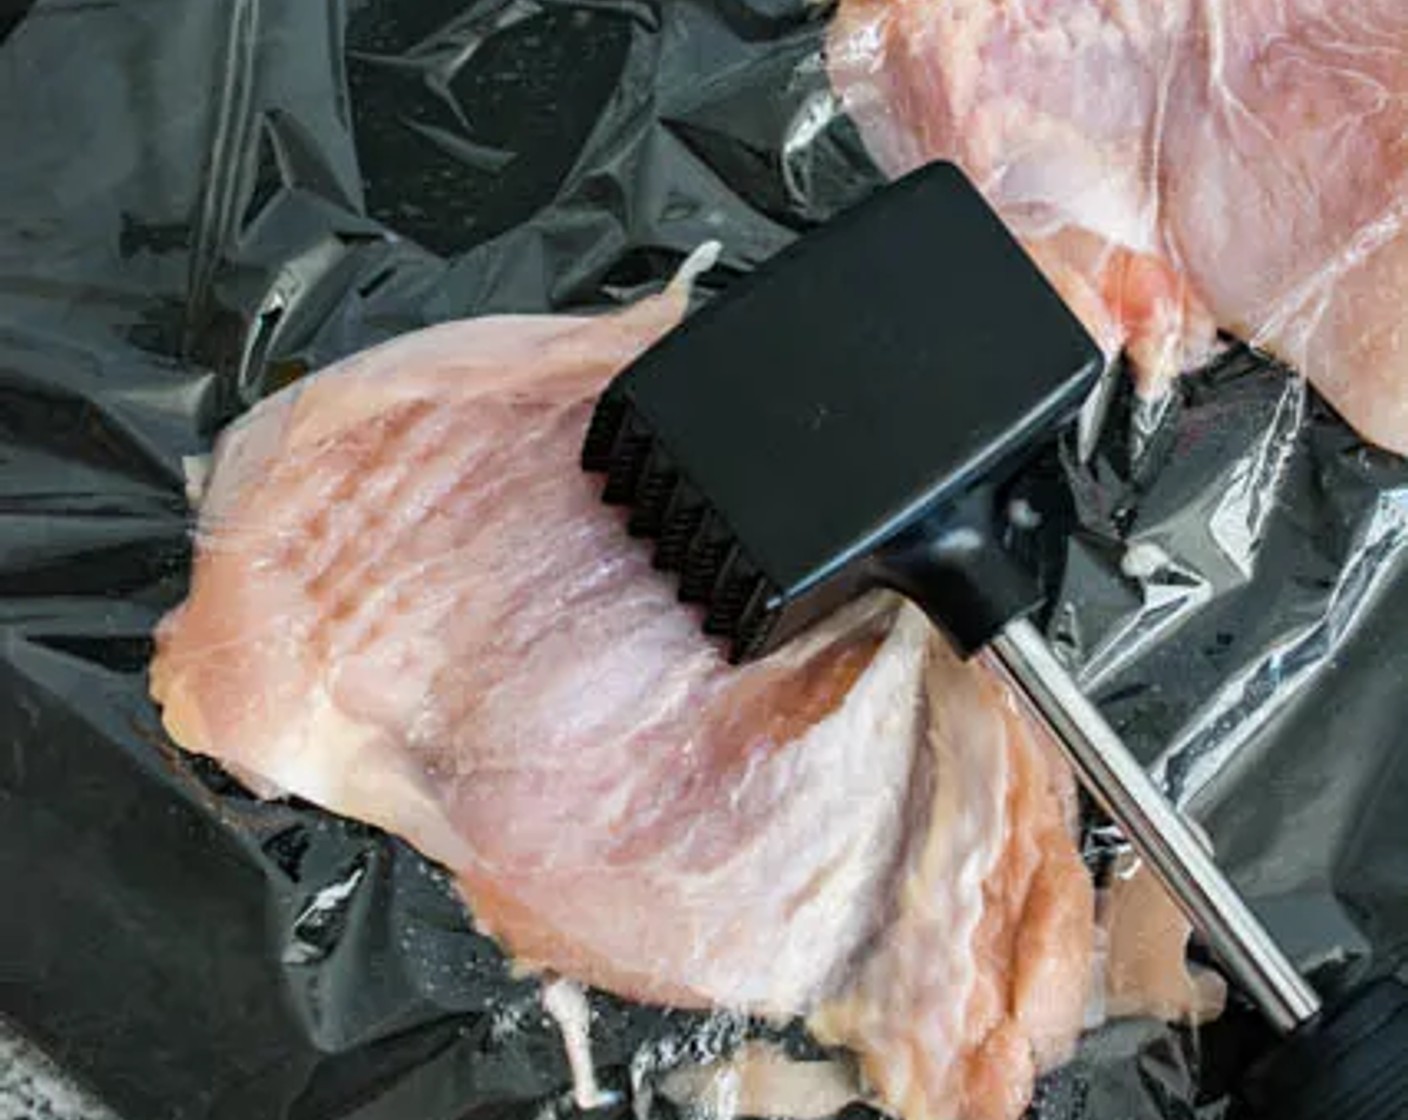 step 1 Place the Boneless, Skinless Chicken Thighs (1.5 lb) on a large cutting board, cover with plastic wrap, then pound with a meat tenderizer till the chicken is at approximately 1/2-inch thickness.